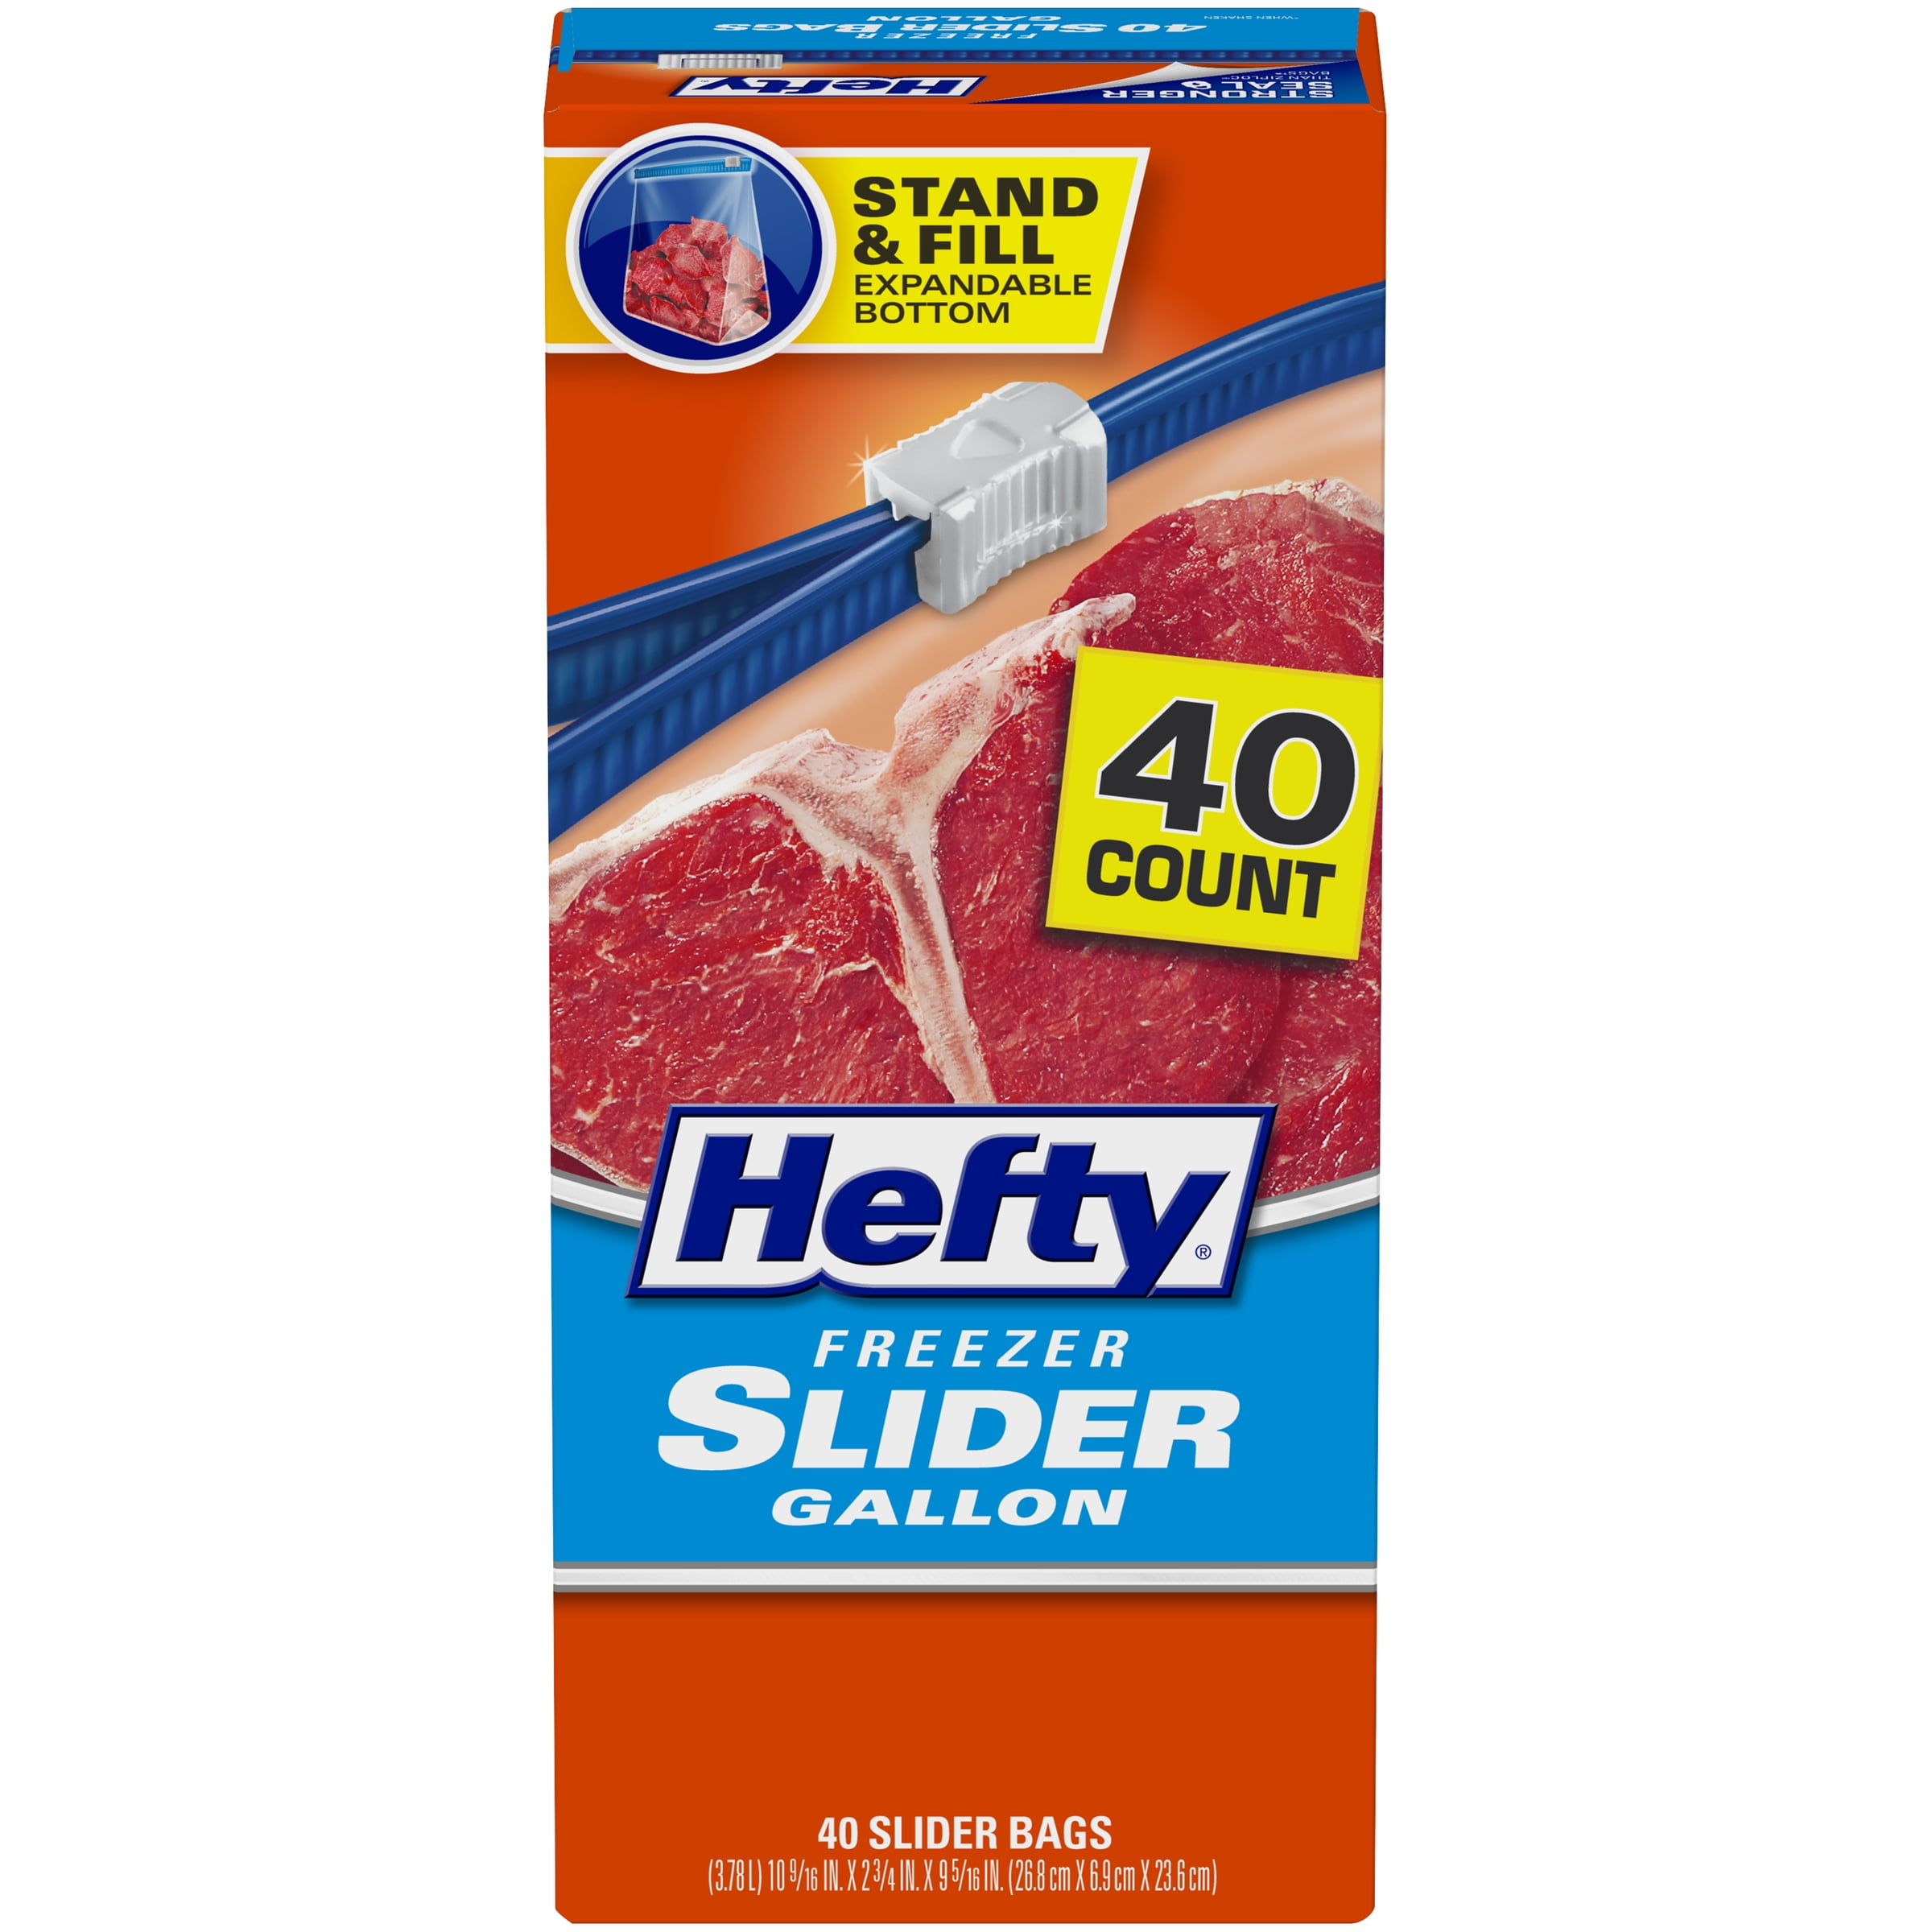 Hefty Slider Freezer Storage Bags 56 Count Pack of 2 Gallon Size 112 Count Total 